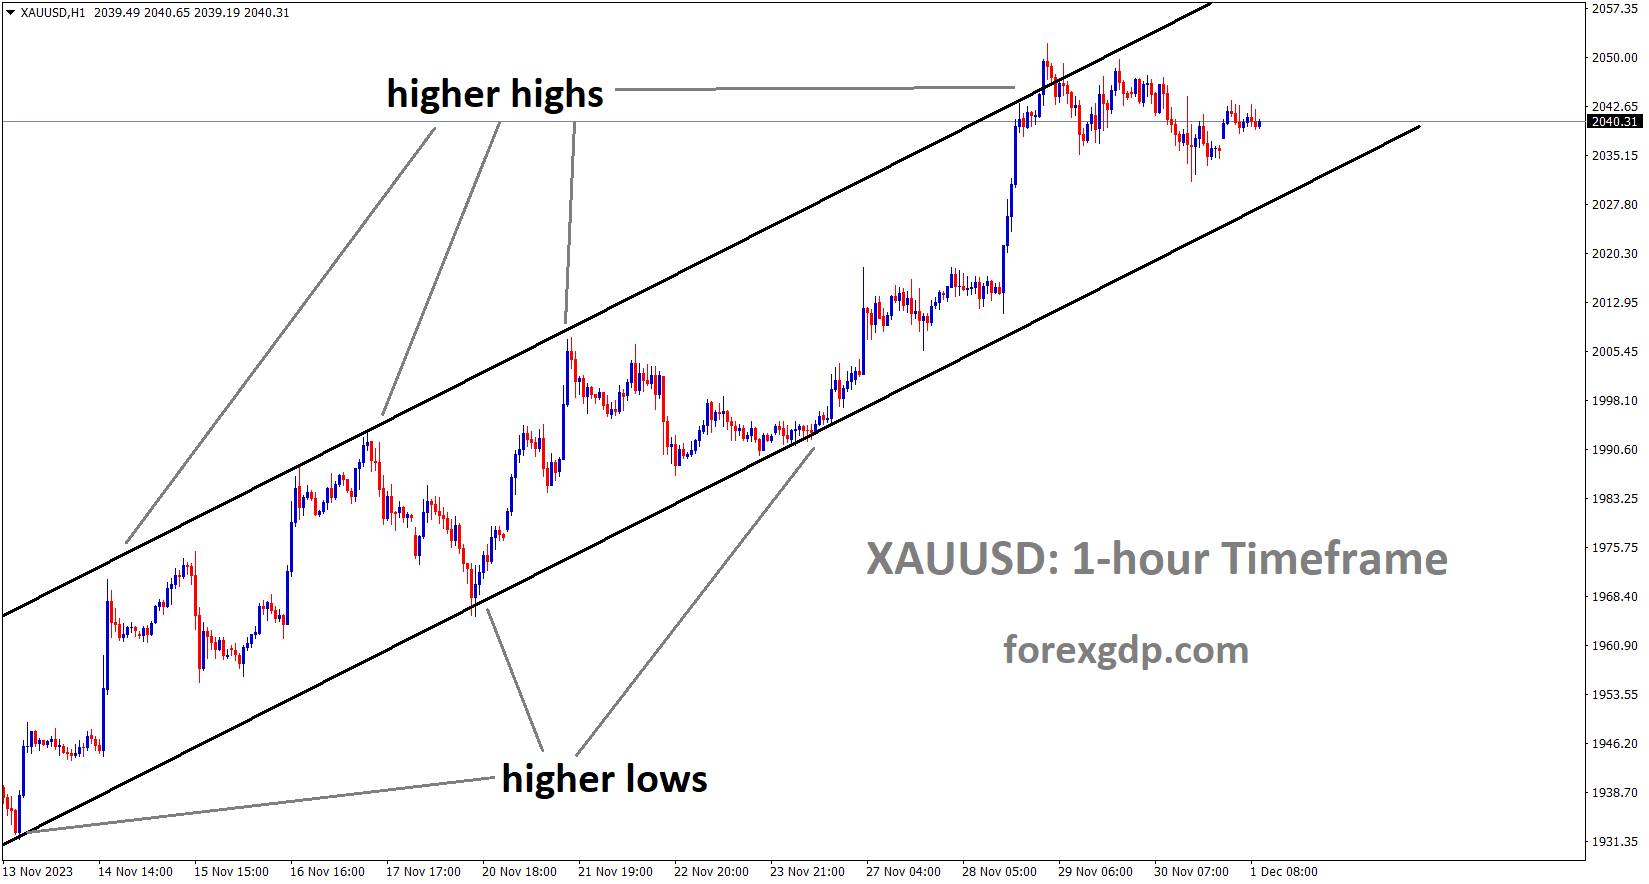 XAUUSD Gold price is moving in an Ascending channel and the market has fallen from the higher high area of the channel